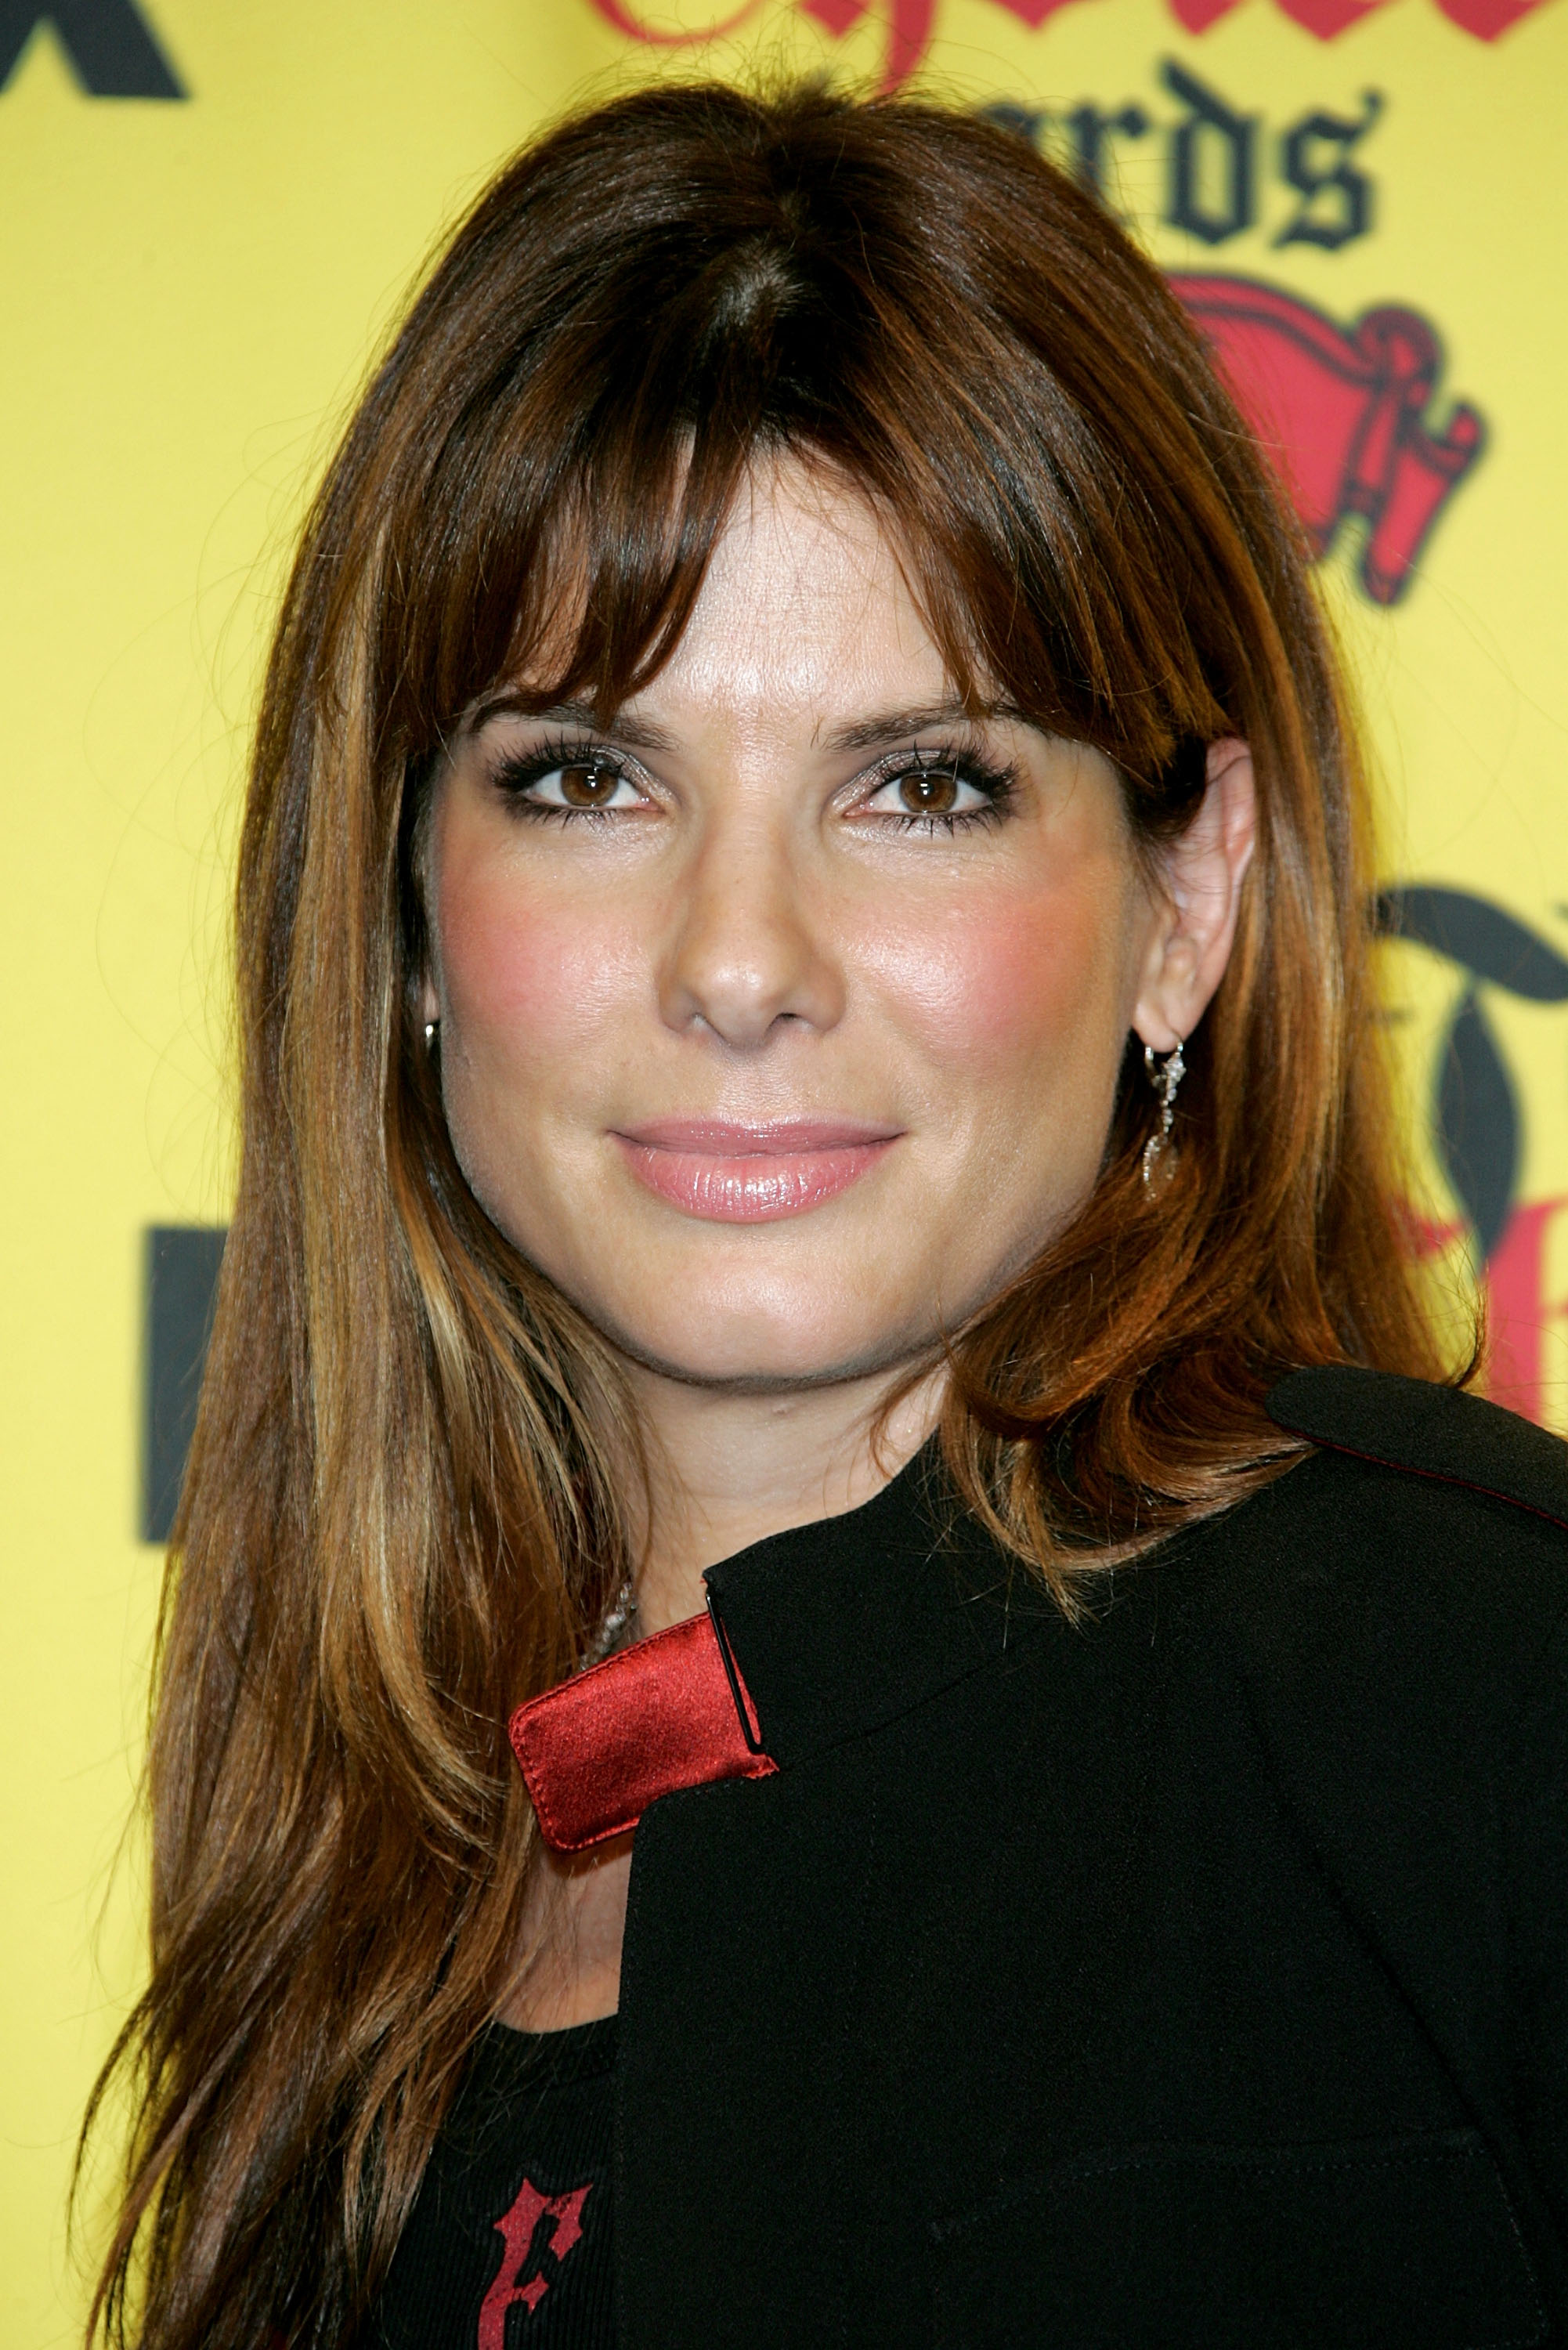 Sandra Bullock in Universal City, California on August 14, 2005 | Source: Getty Images